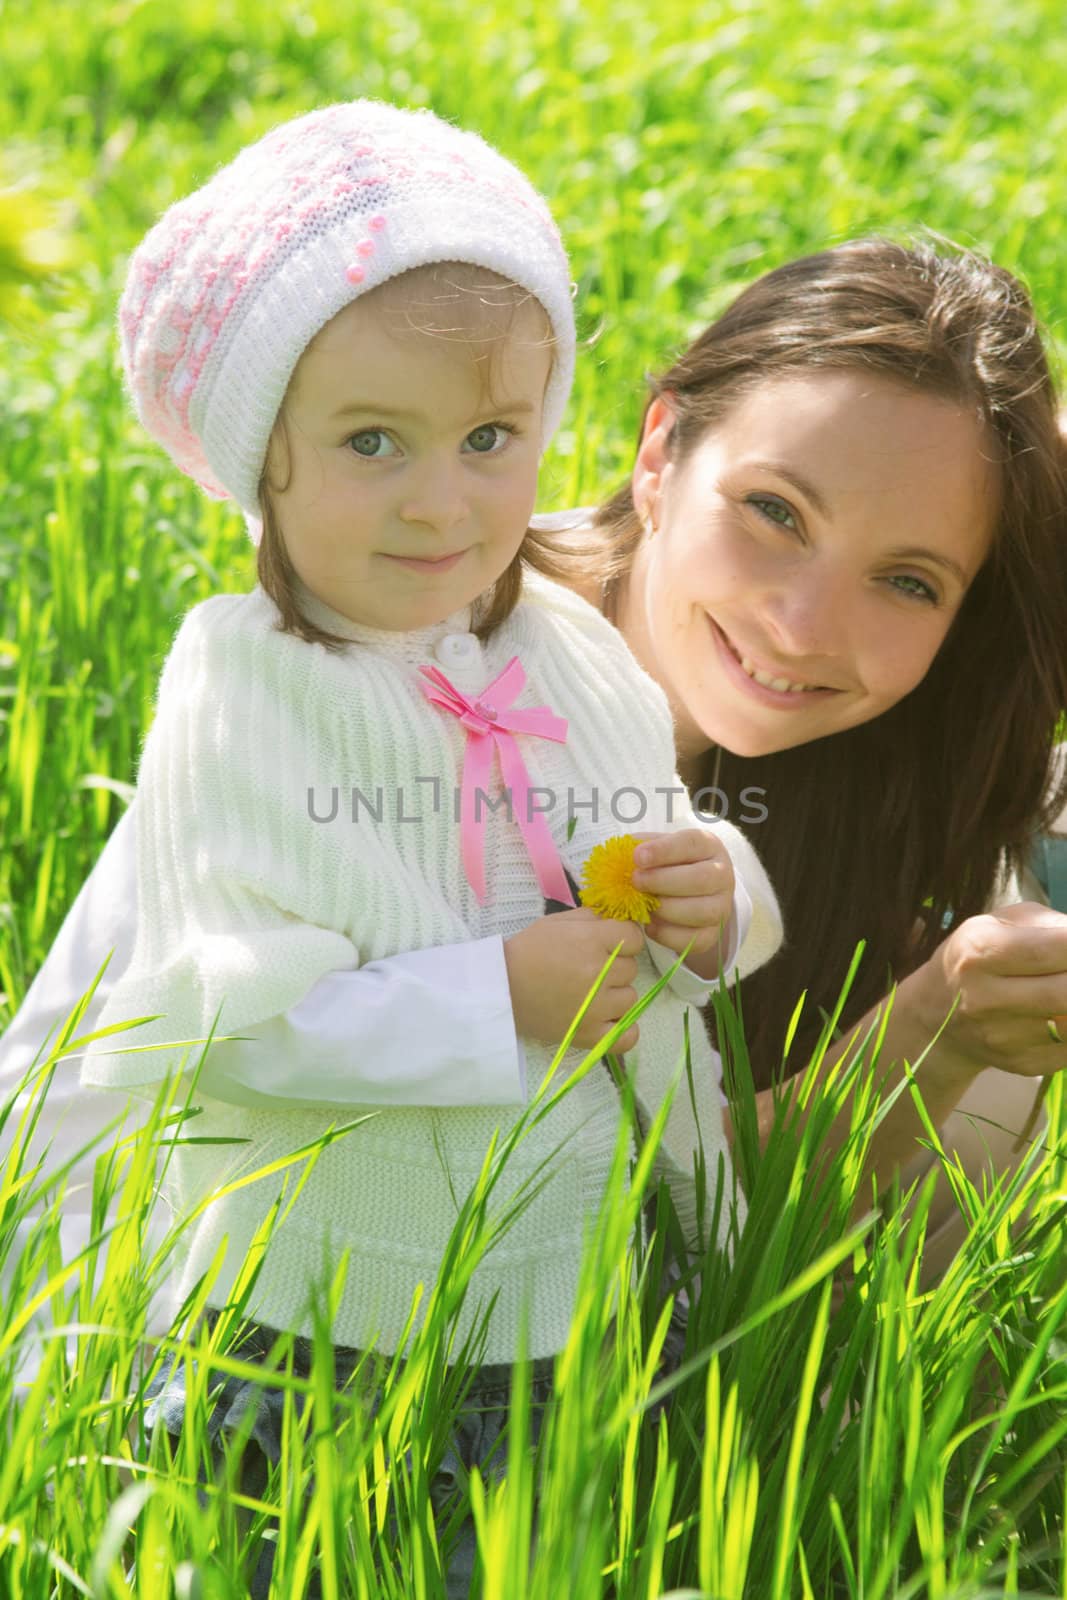 Smiling mother and daughter among green grass